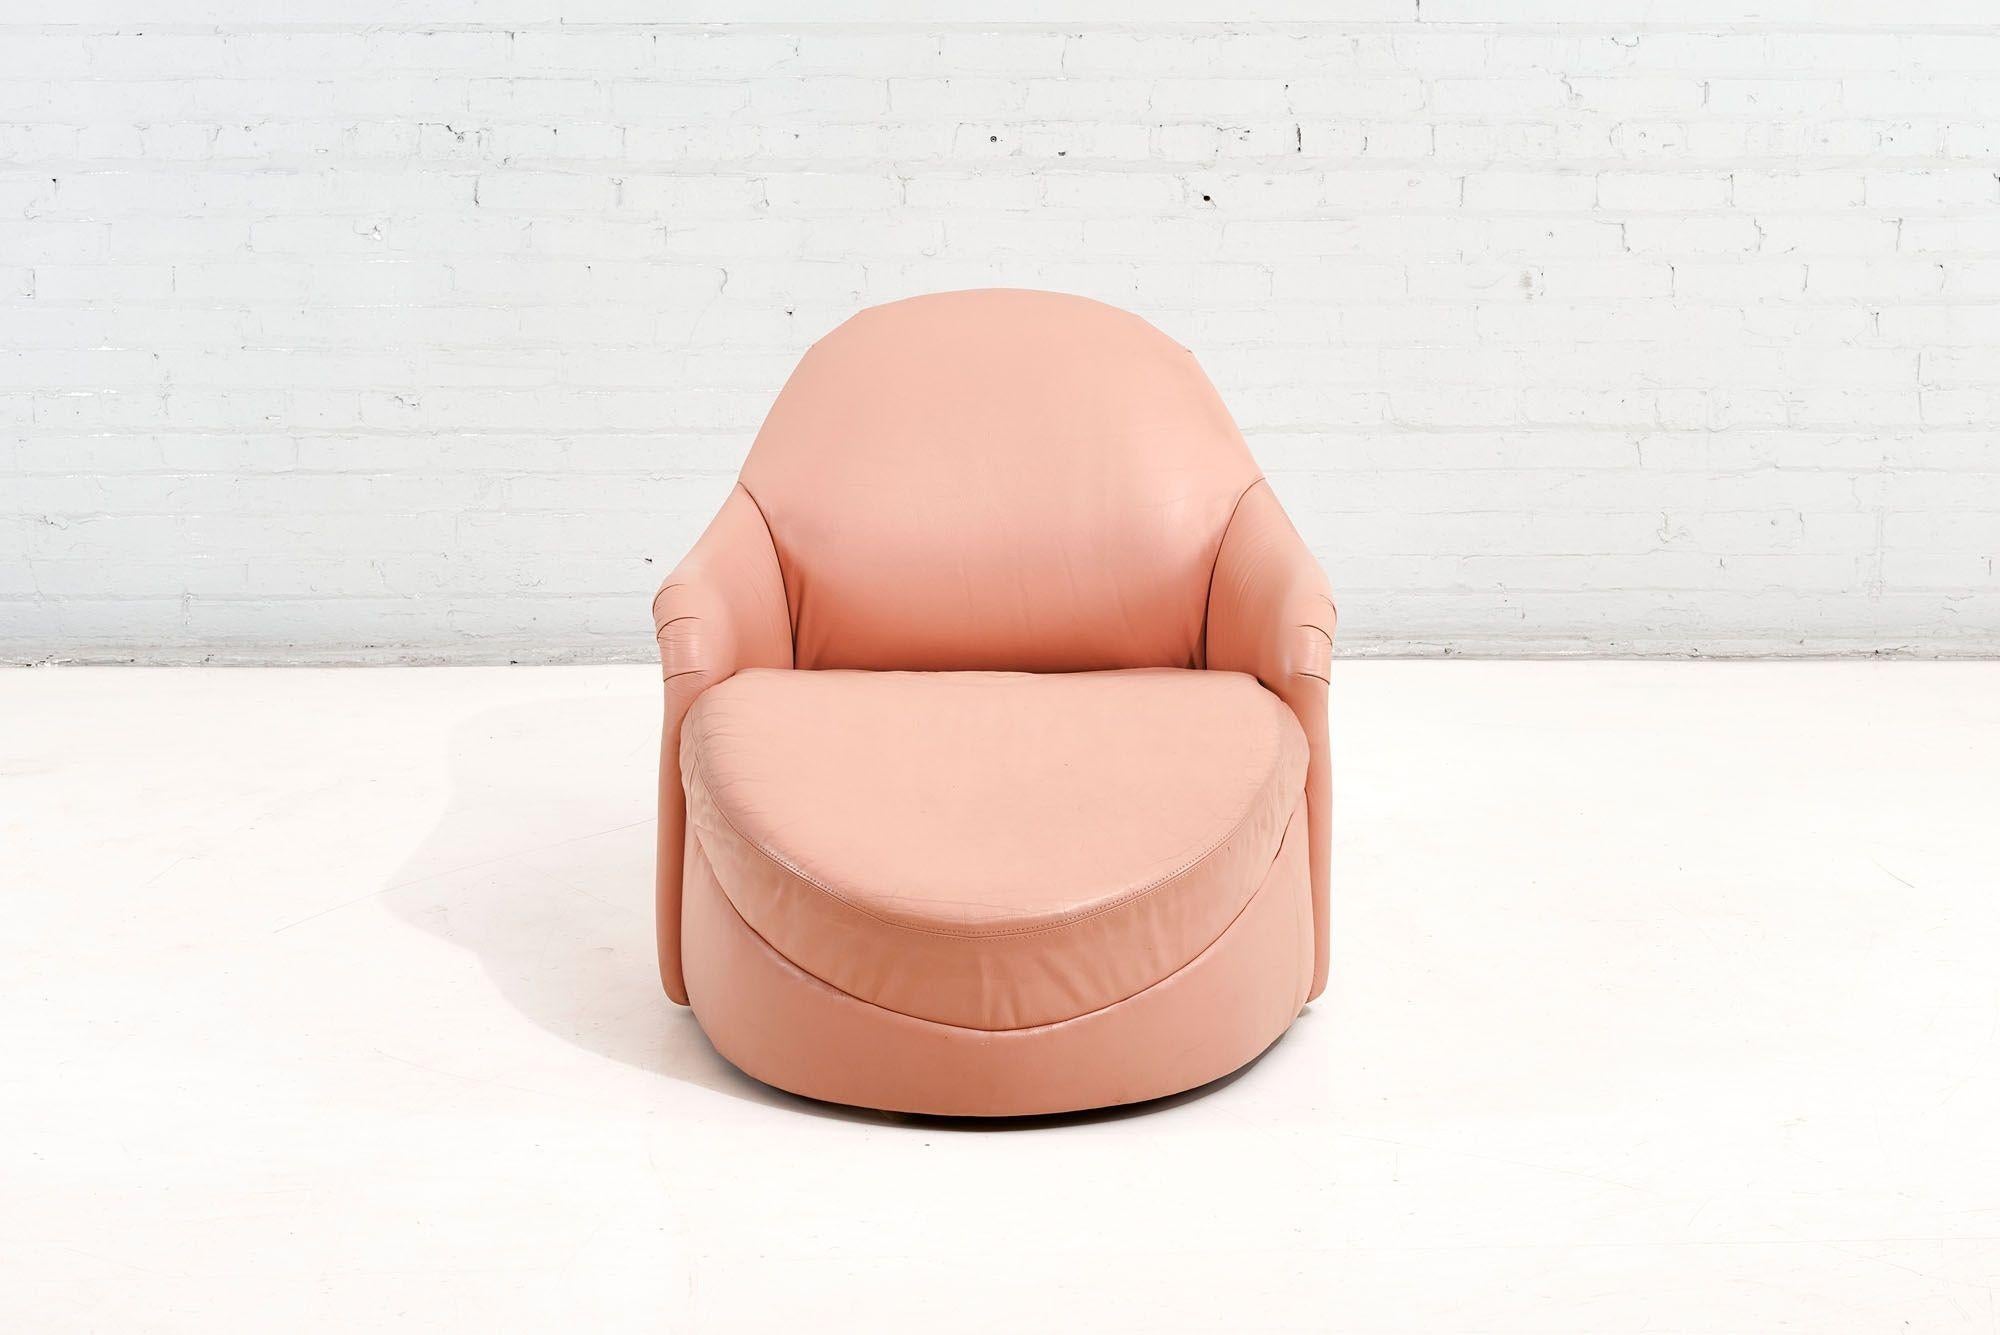 Milo Baughman for Thayer Coggin leather swivel chaise, 1980, Original pink leather.